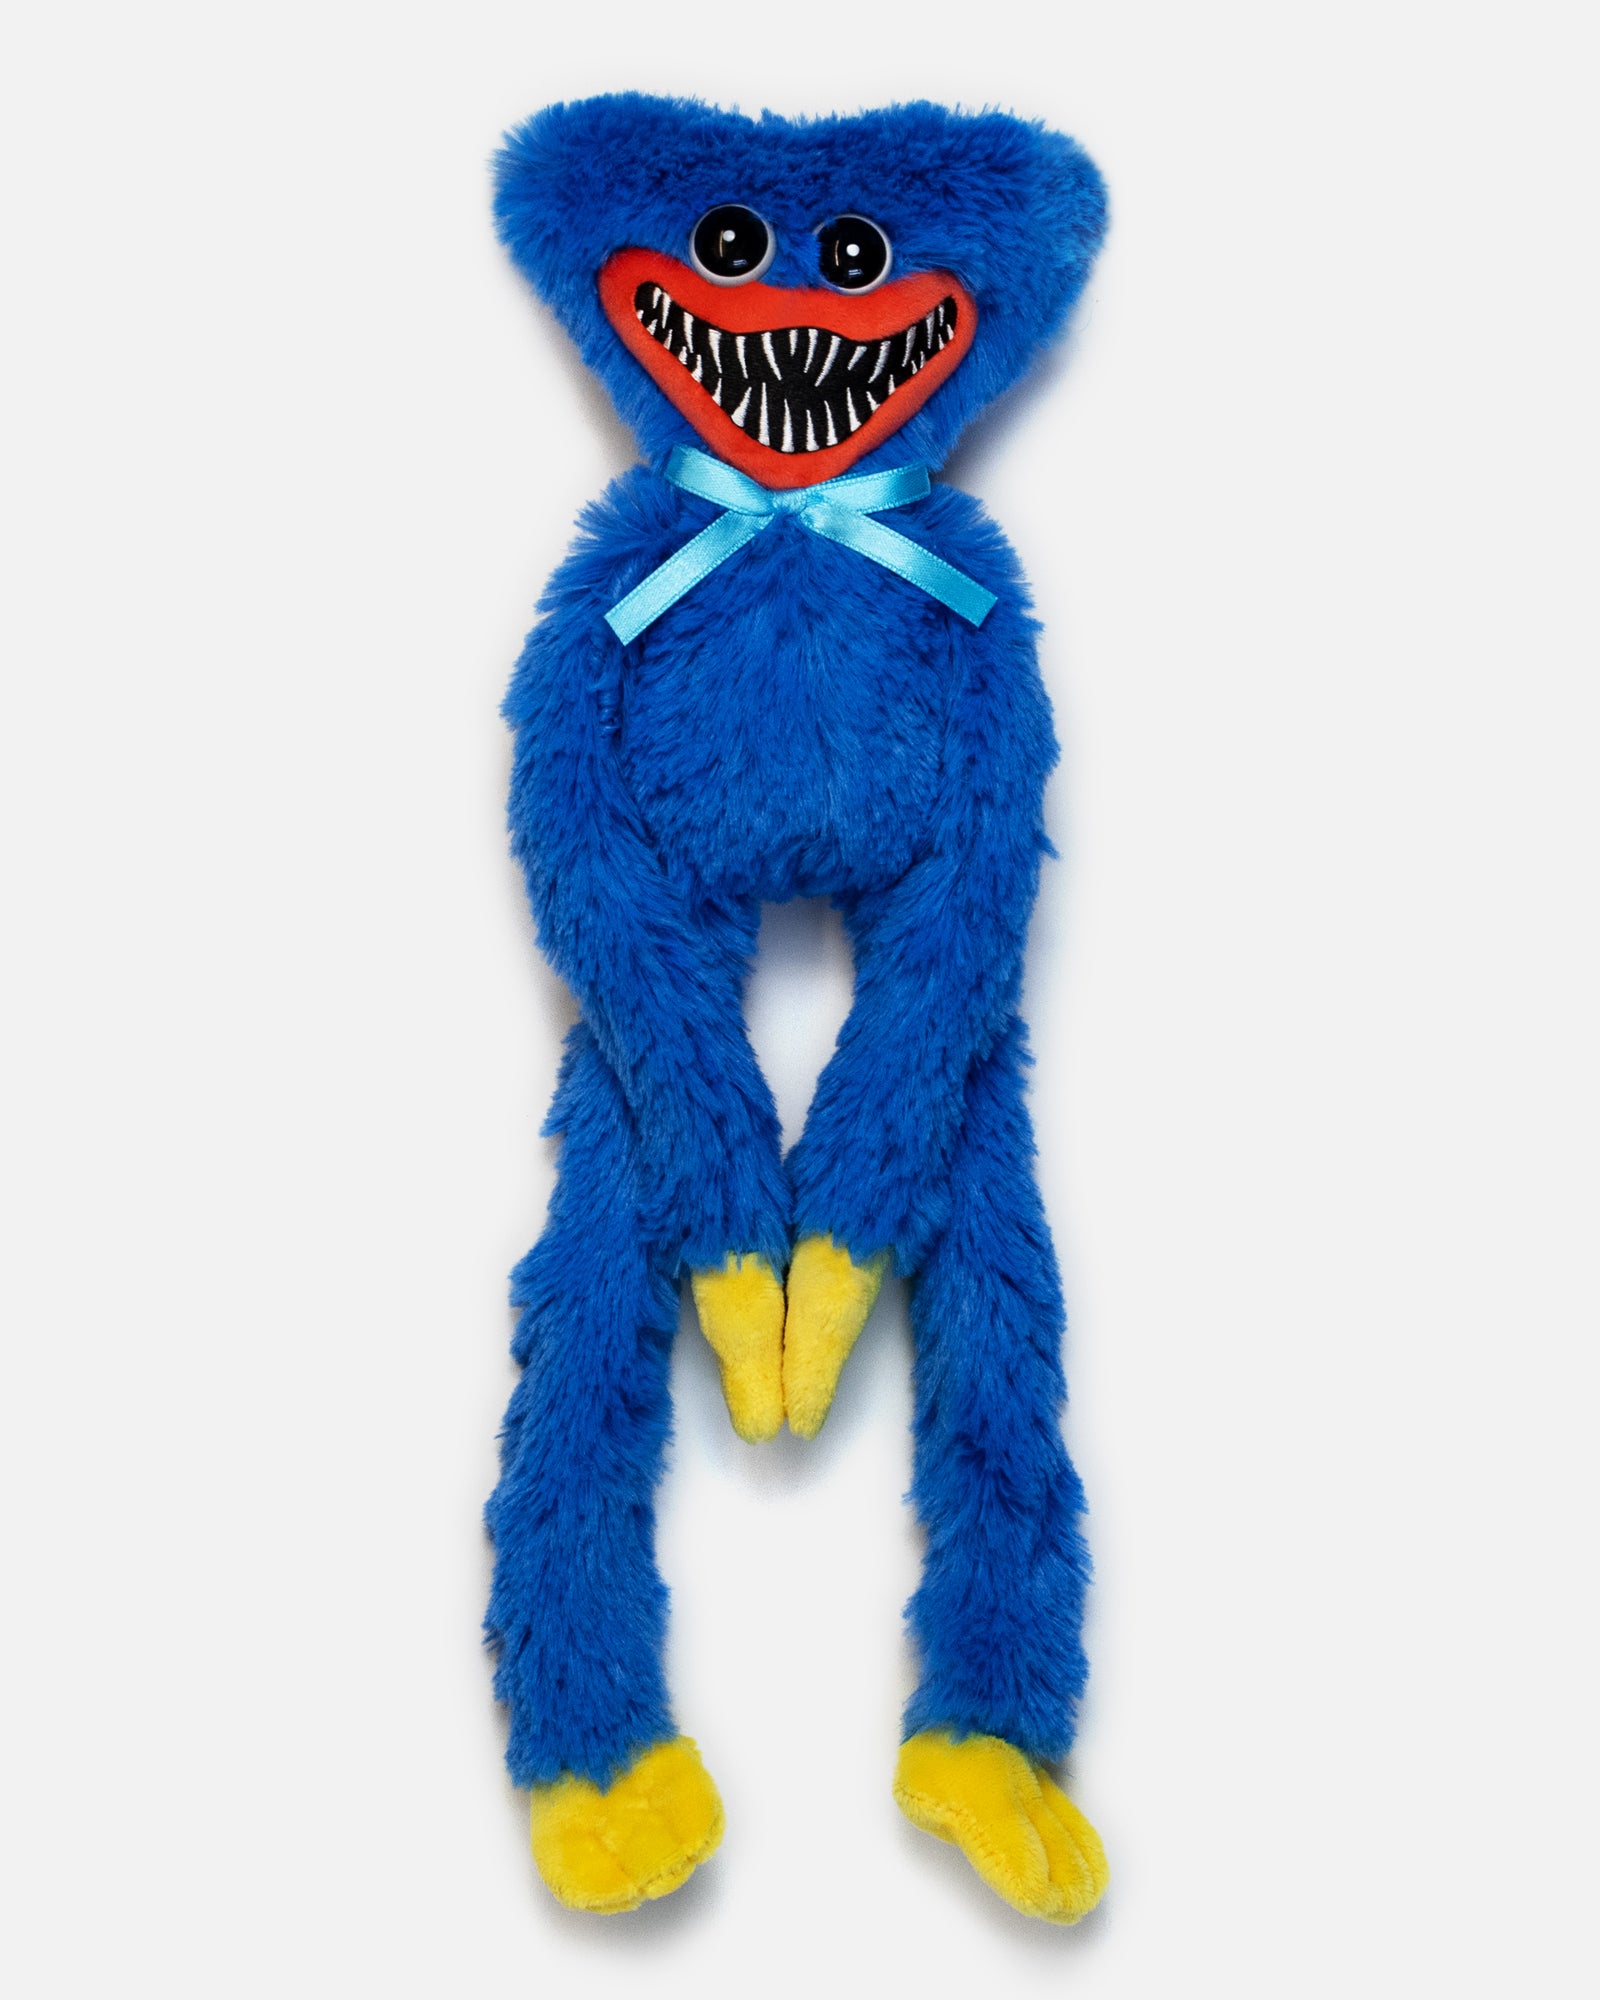 scary huggy wuggy poppy playtime 14" plush front. hands velcro together.